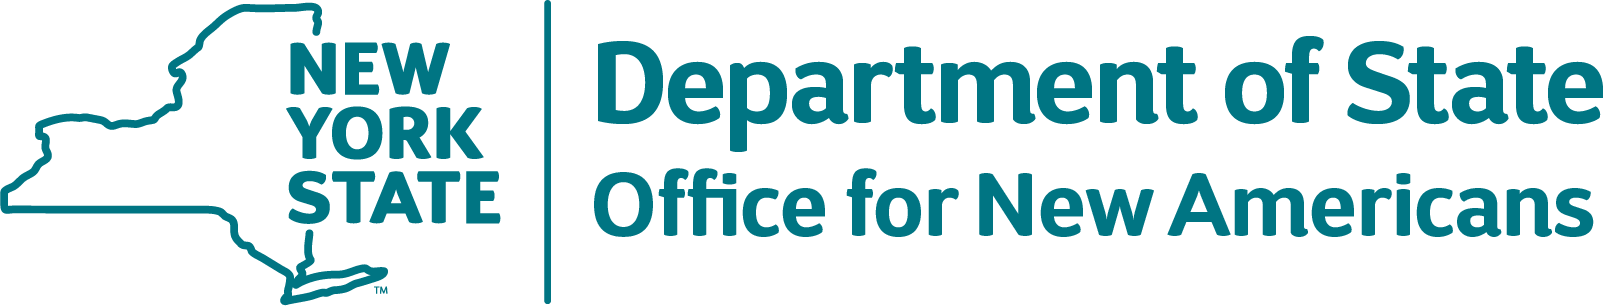 DOS Office for New Americans Logo Teal